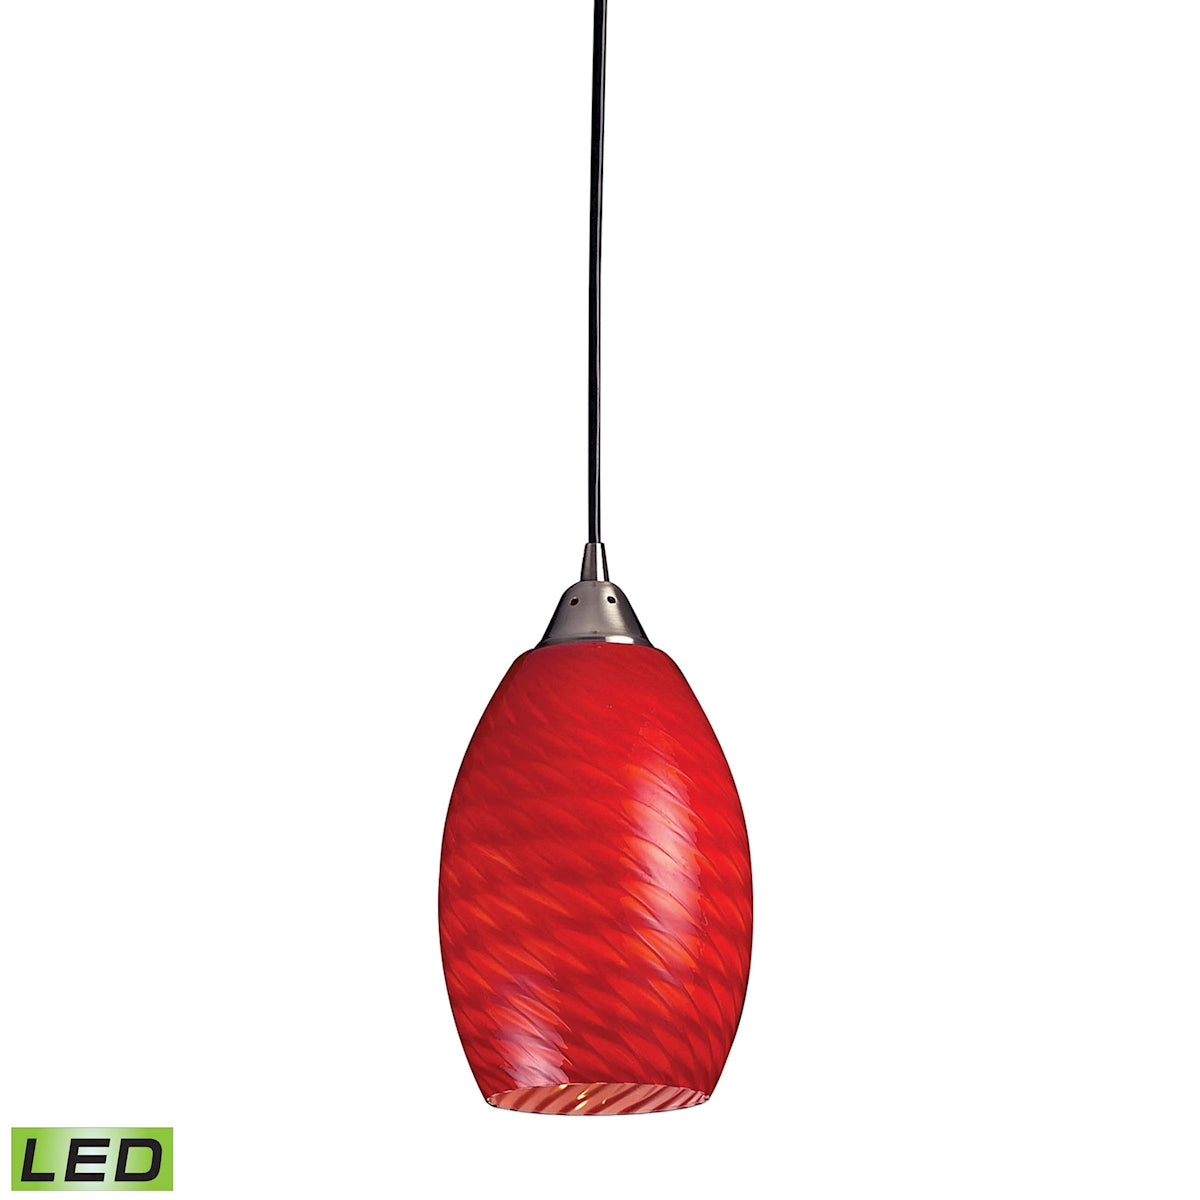 ELK Lighting 517-1SC-LED Mulinello 1-Light Mini Pendant in Satin Nickel with Scarlet Red Glass - Includes LED Bulb